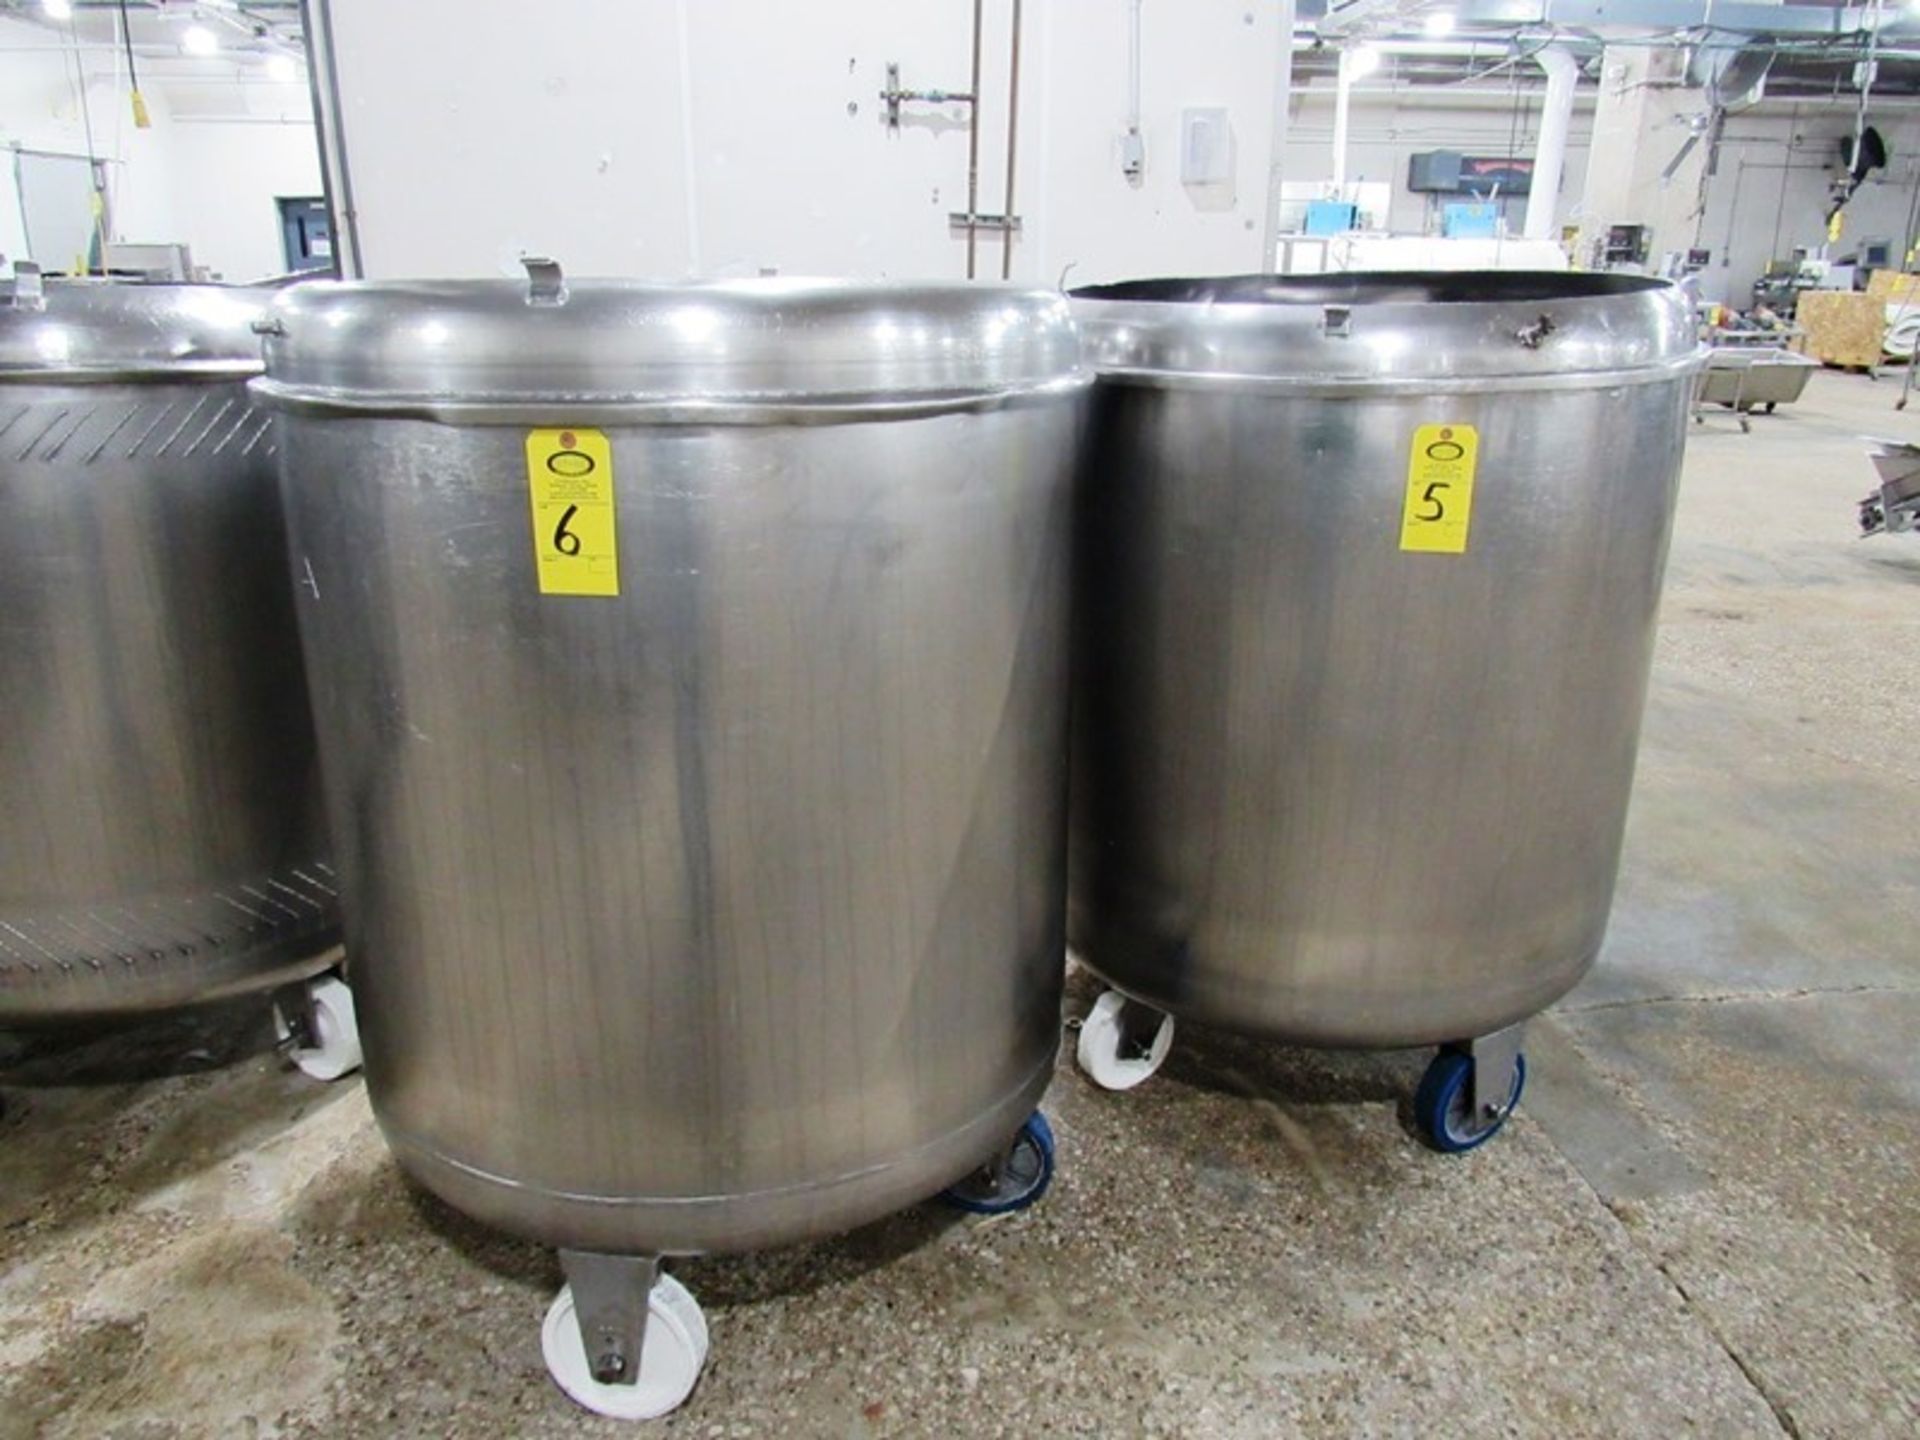 Globus Stainless Steel 750 Liter Drum with lid Removal: By Appointment Only. Required Rigging Fee $